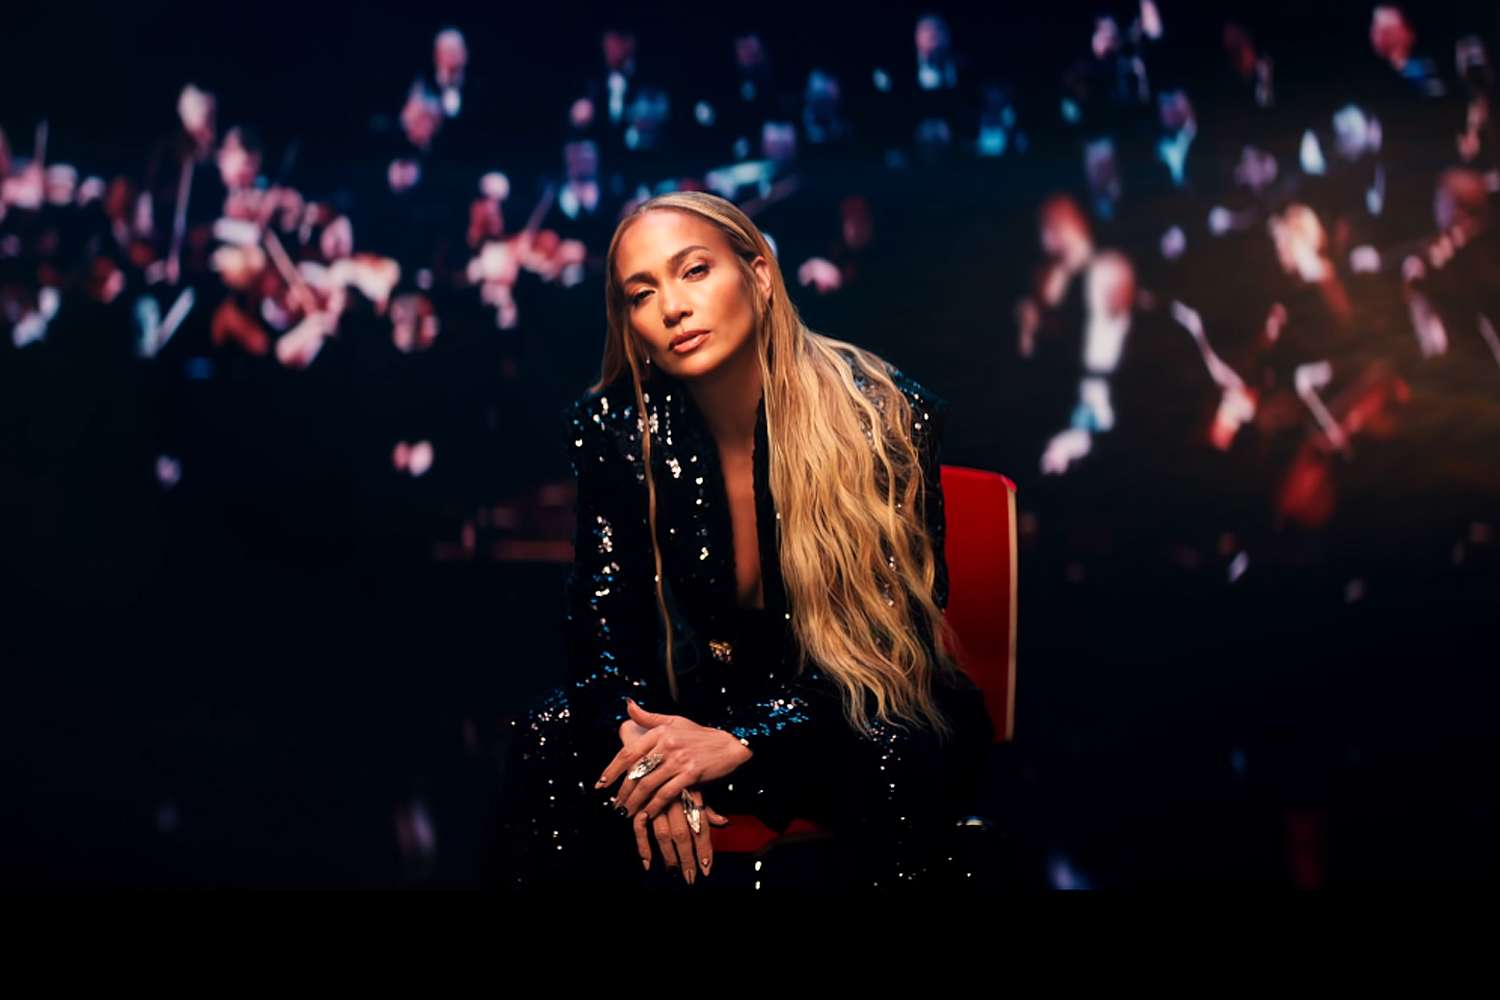 https://people.com/music/jennifer-lopez-releases-on-my-way-music-video/